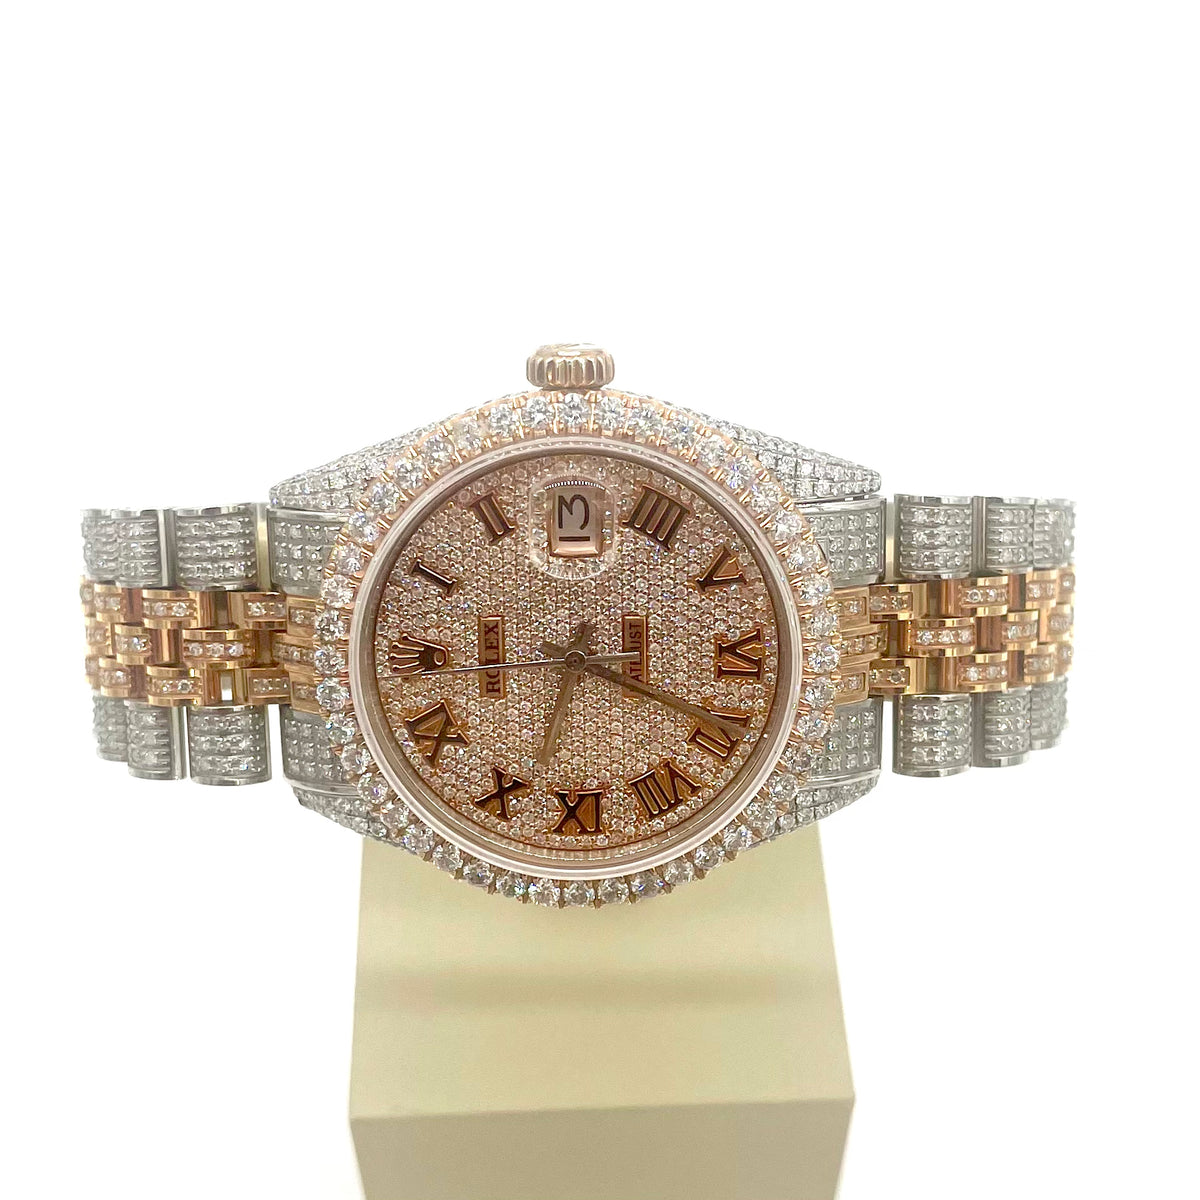 Rolex 1601 Date Just Full setting diamonds (Serial # 2383872 ) ROLEX 36MM ROSE GOLD ICED OUT DATEJUST ARABIC DIAL WITH JUBILEE BAND | NATURAL VS1 15CT